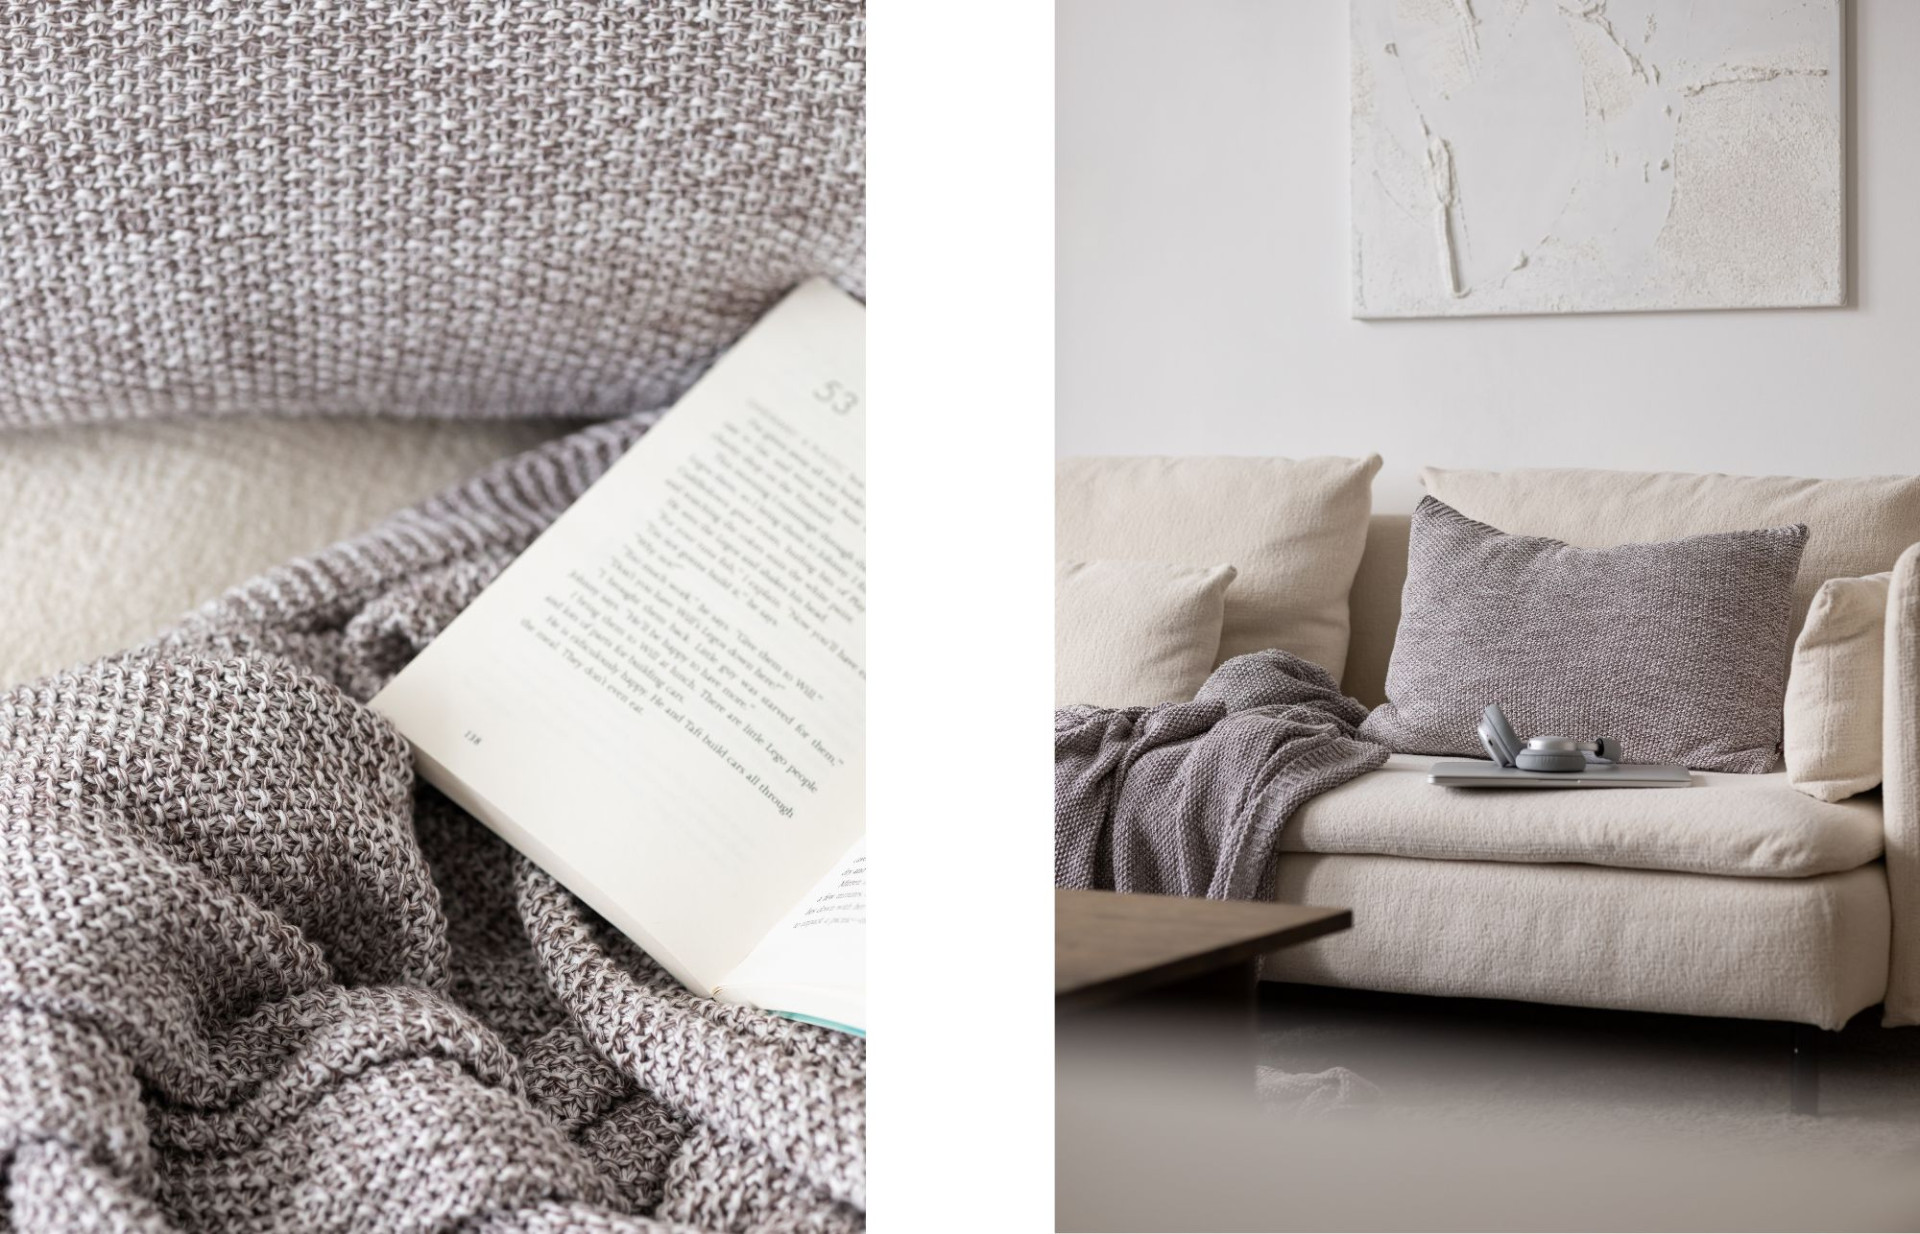 Our Monochrome Melange knitted blanket offers cosy comfort.